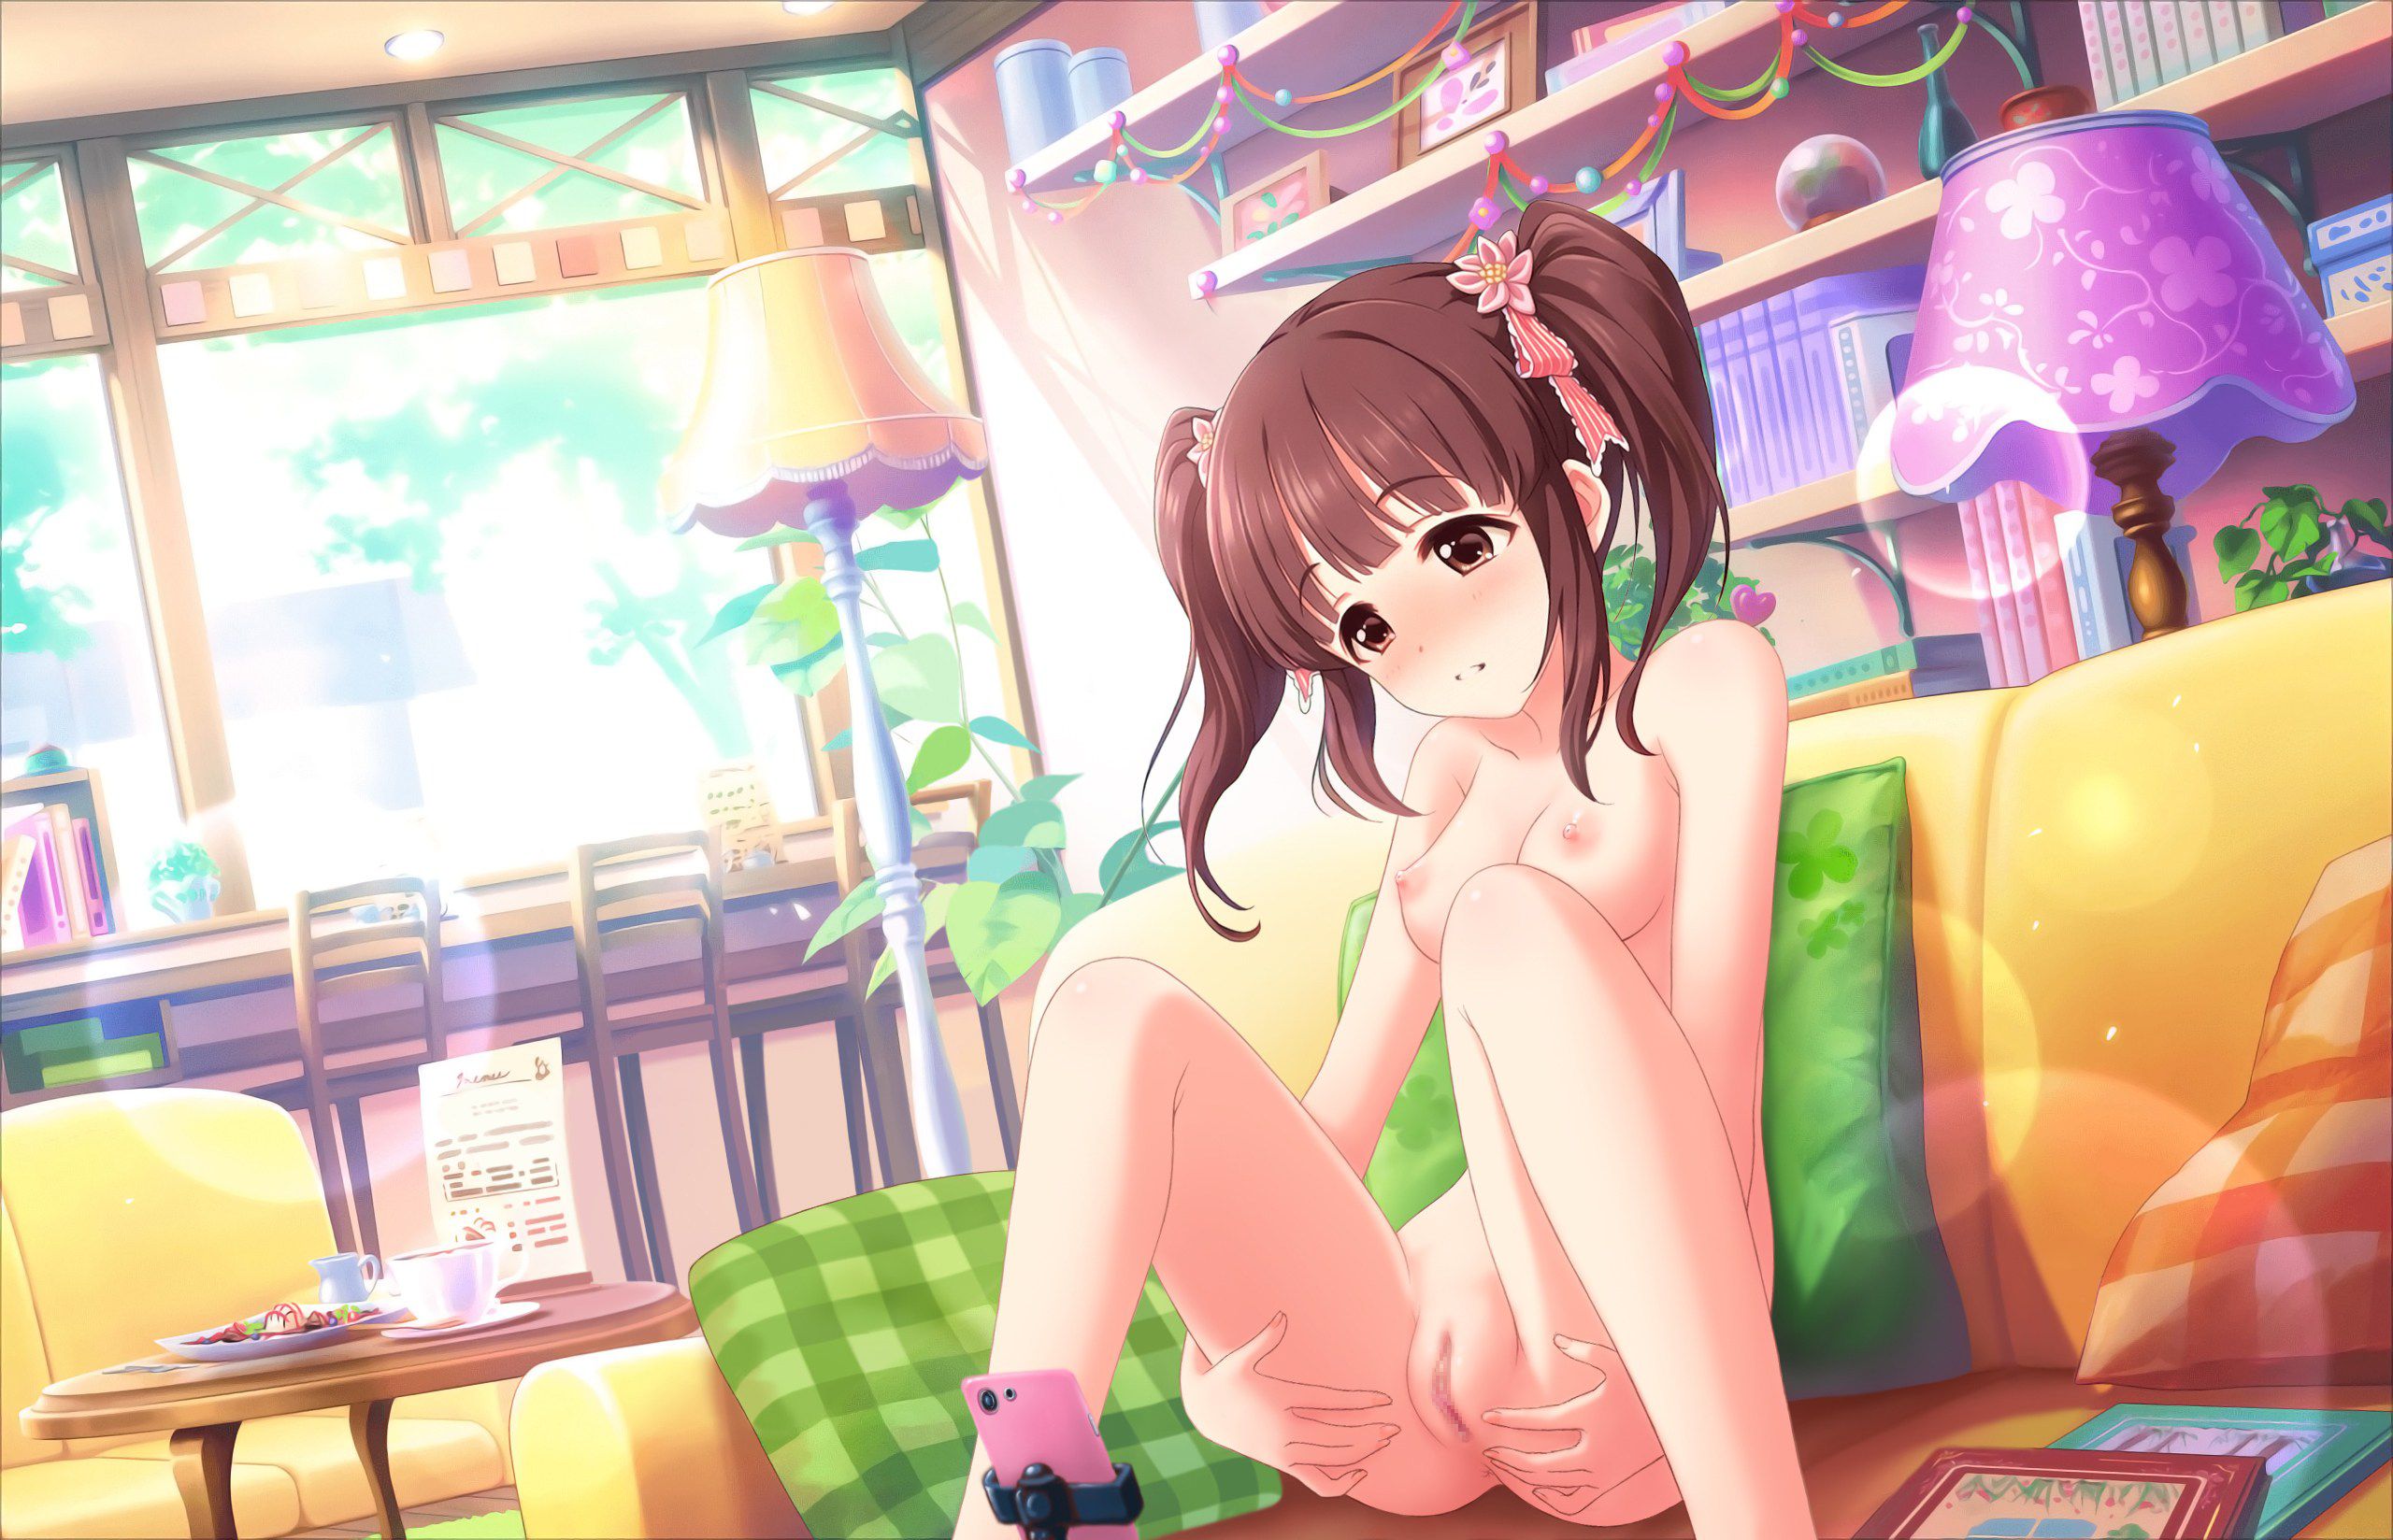 [Idolmaster] of the eye mass stripping of Photoshop and erotic Photoshop is wonderful that 43 15